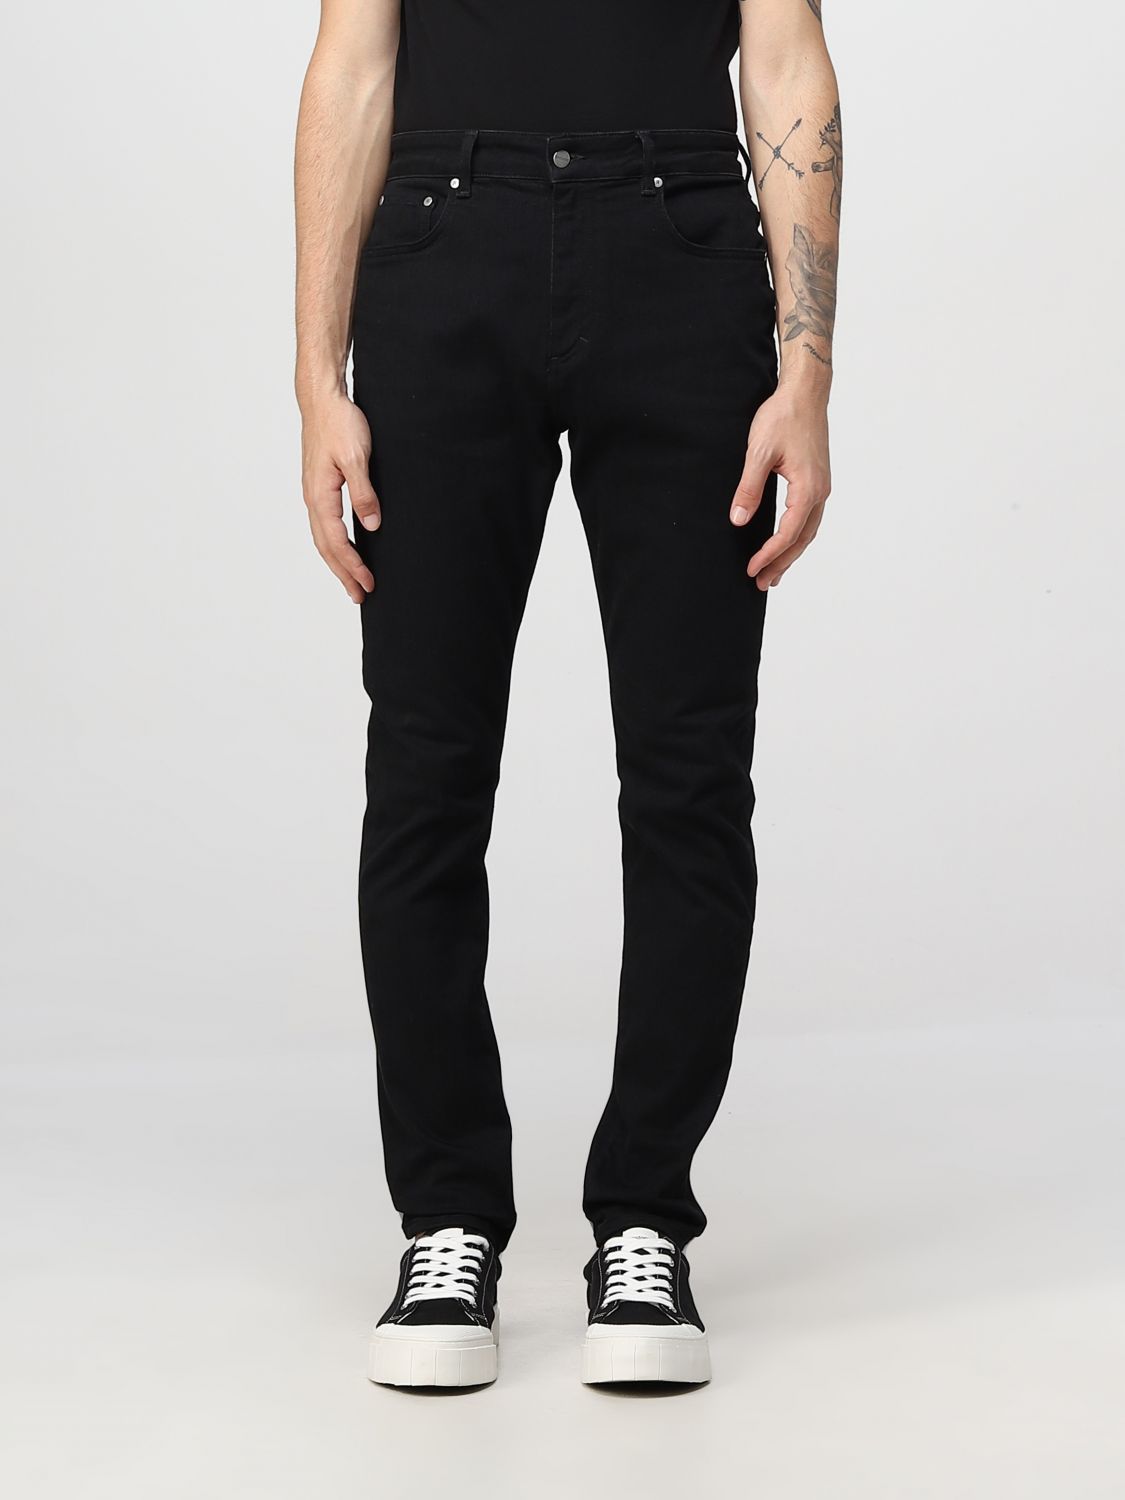 REPRESENT: jeans for man - Black | Represent jeans M07043 online on ...